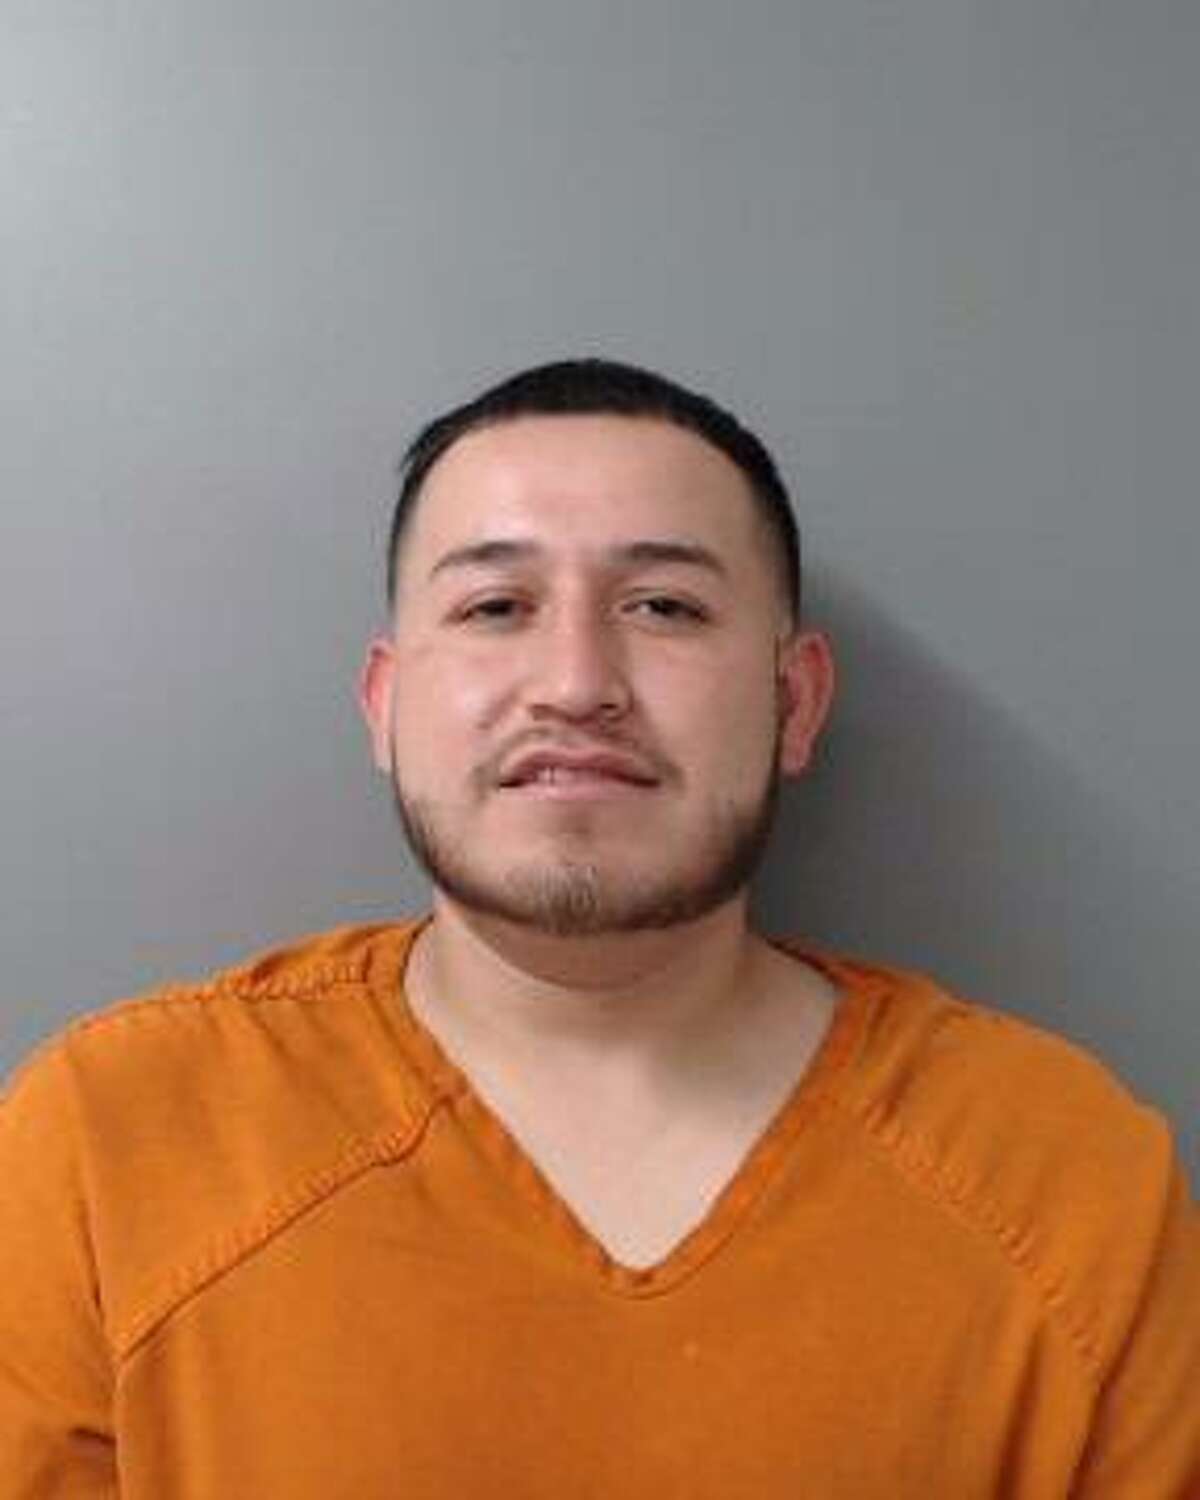 Jesus Abraham Vallejo-Adriano, 24, was served with an arrest warrant that charged him with aggravated assault with a deadly weapon.